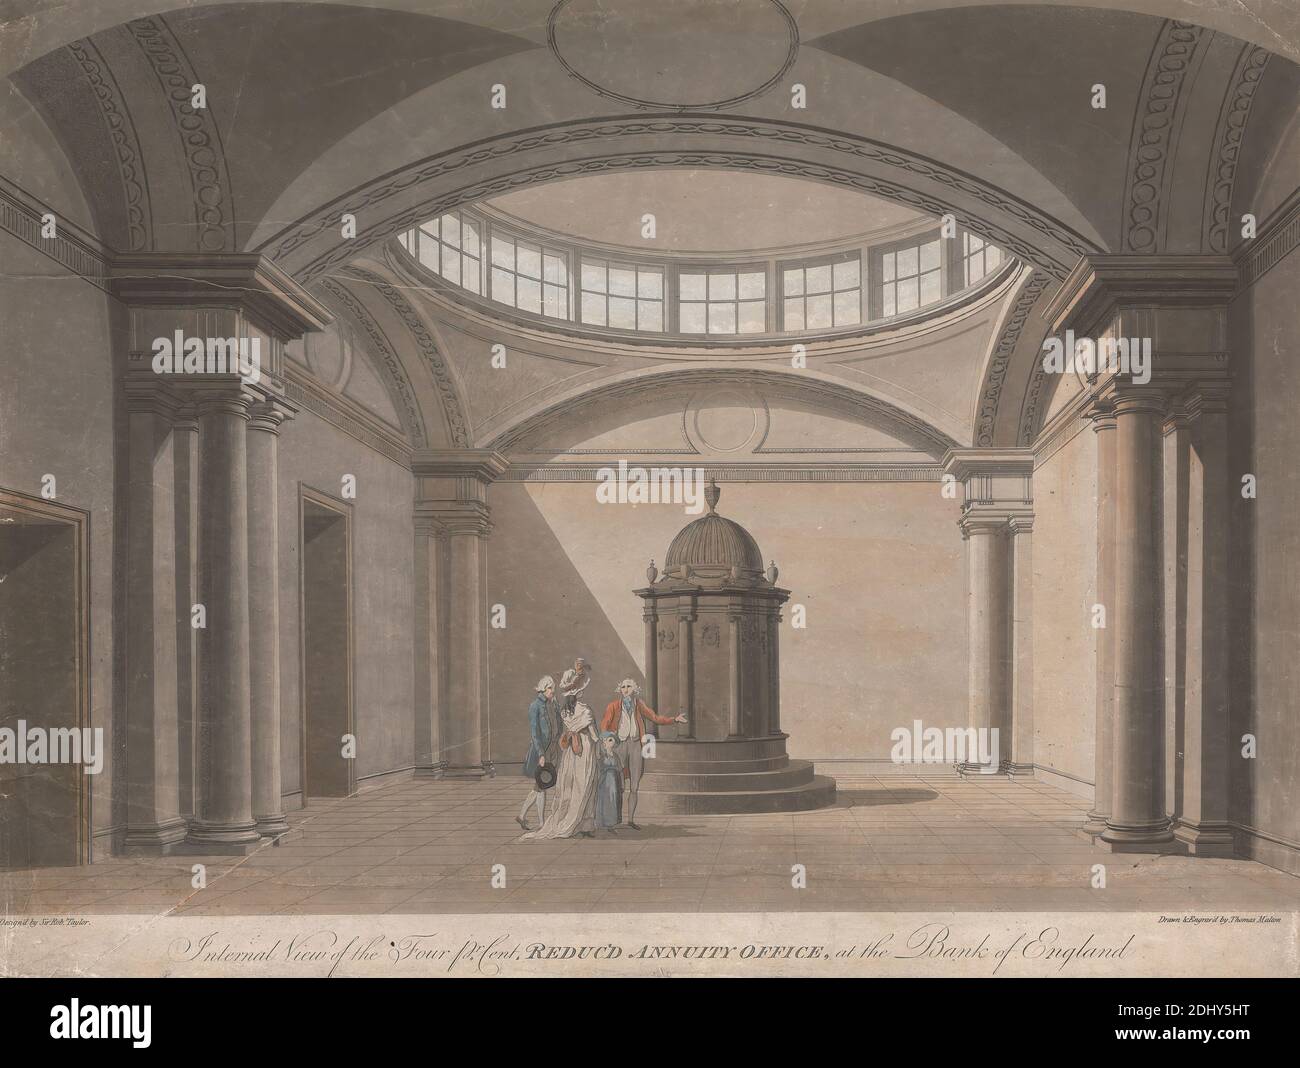 Internal View of the Four per cent Reduced Annuity Office, at the Bank of England, Thomas Malton, 1726–1801, British, after Thomas Malton, 1726–1801, British, 1790, Hand colored aquatint on slightly textured, moderately thick, gray wove paper, Sheet: 15 × 19 13/16 inches (38.1 × 50.3 cm), architectural subject Stock Photo